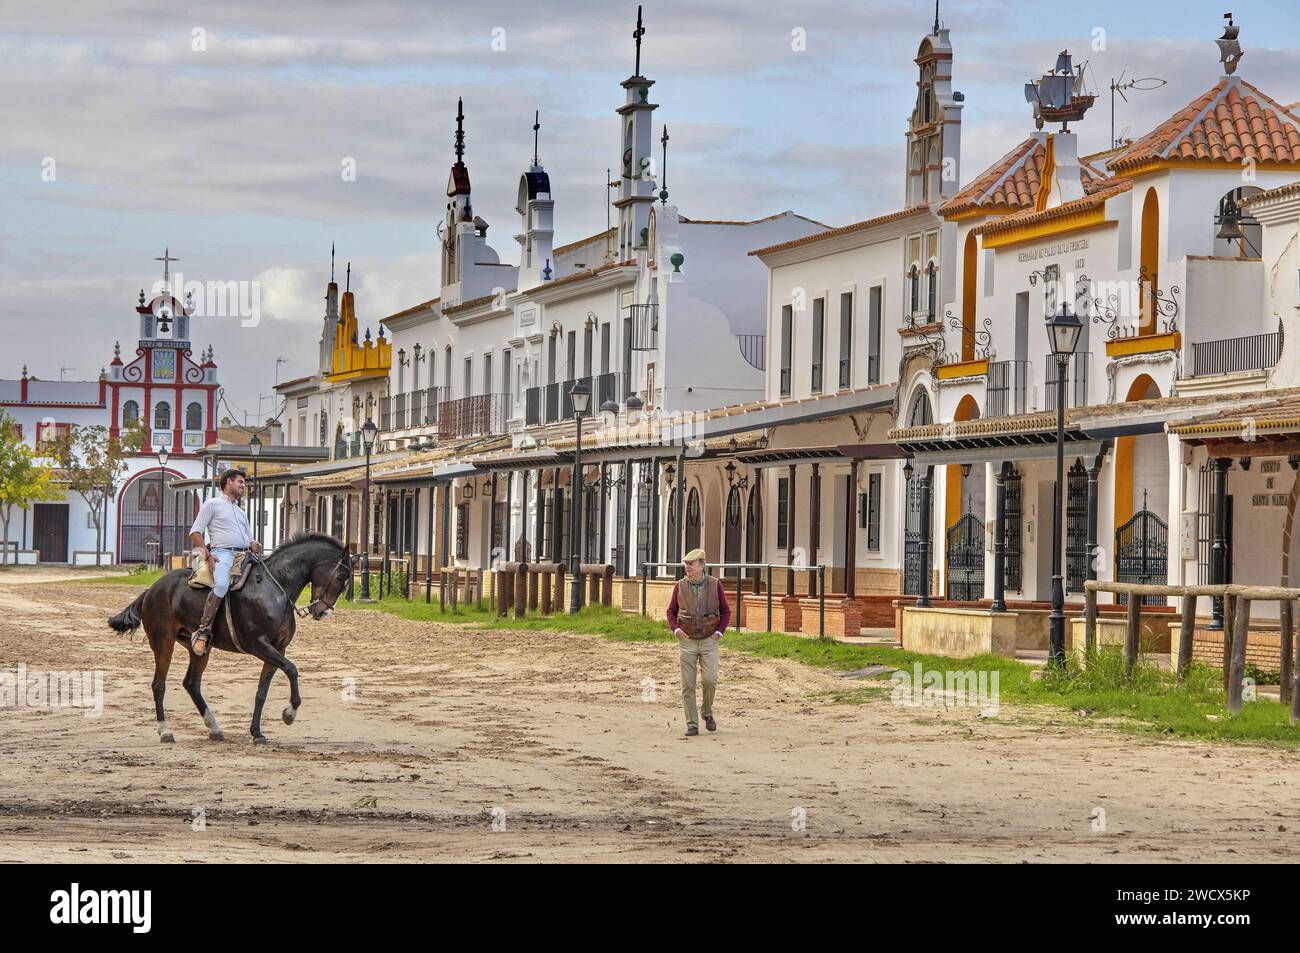 Spain, Andalusia, El Rocío, rider on a black horse alongside an old man wearing a beret in a sandy street lined with hermandades, the houses of Catholic brotherhoods Stock Photo